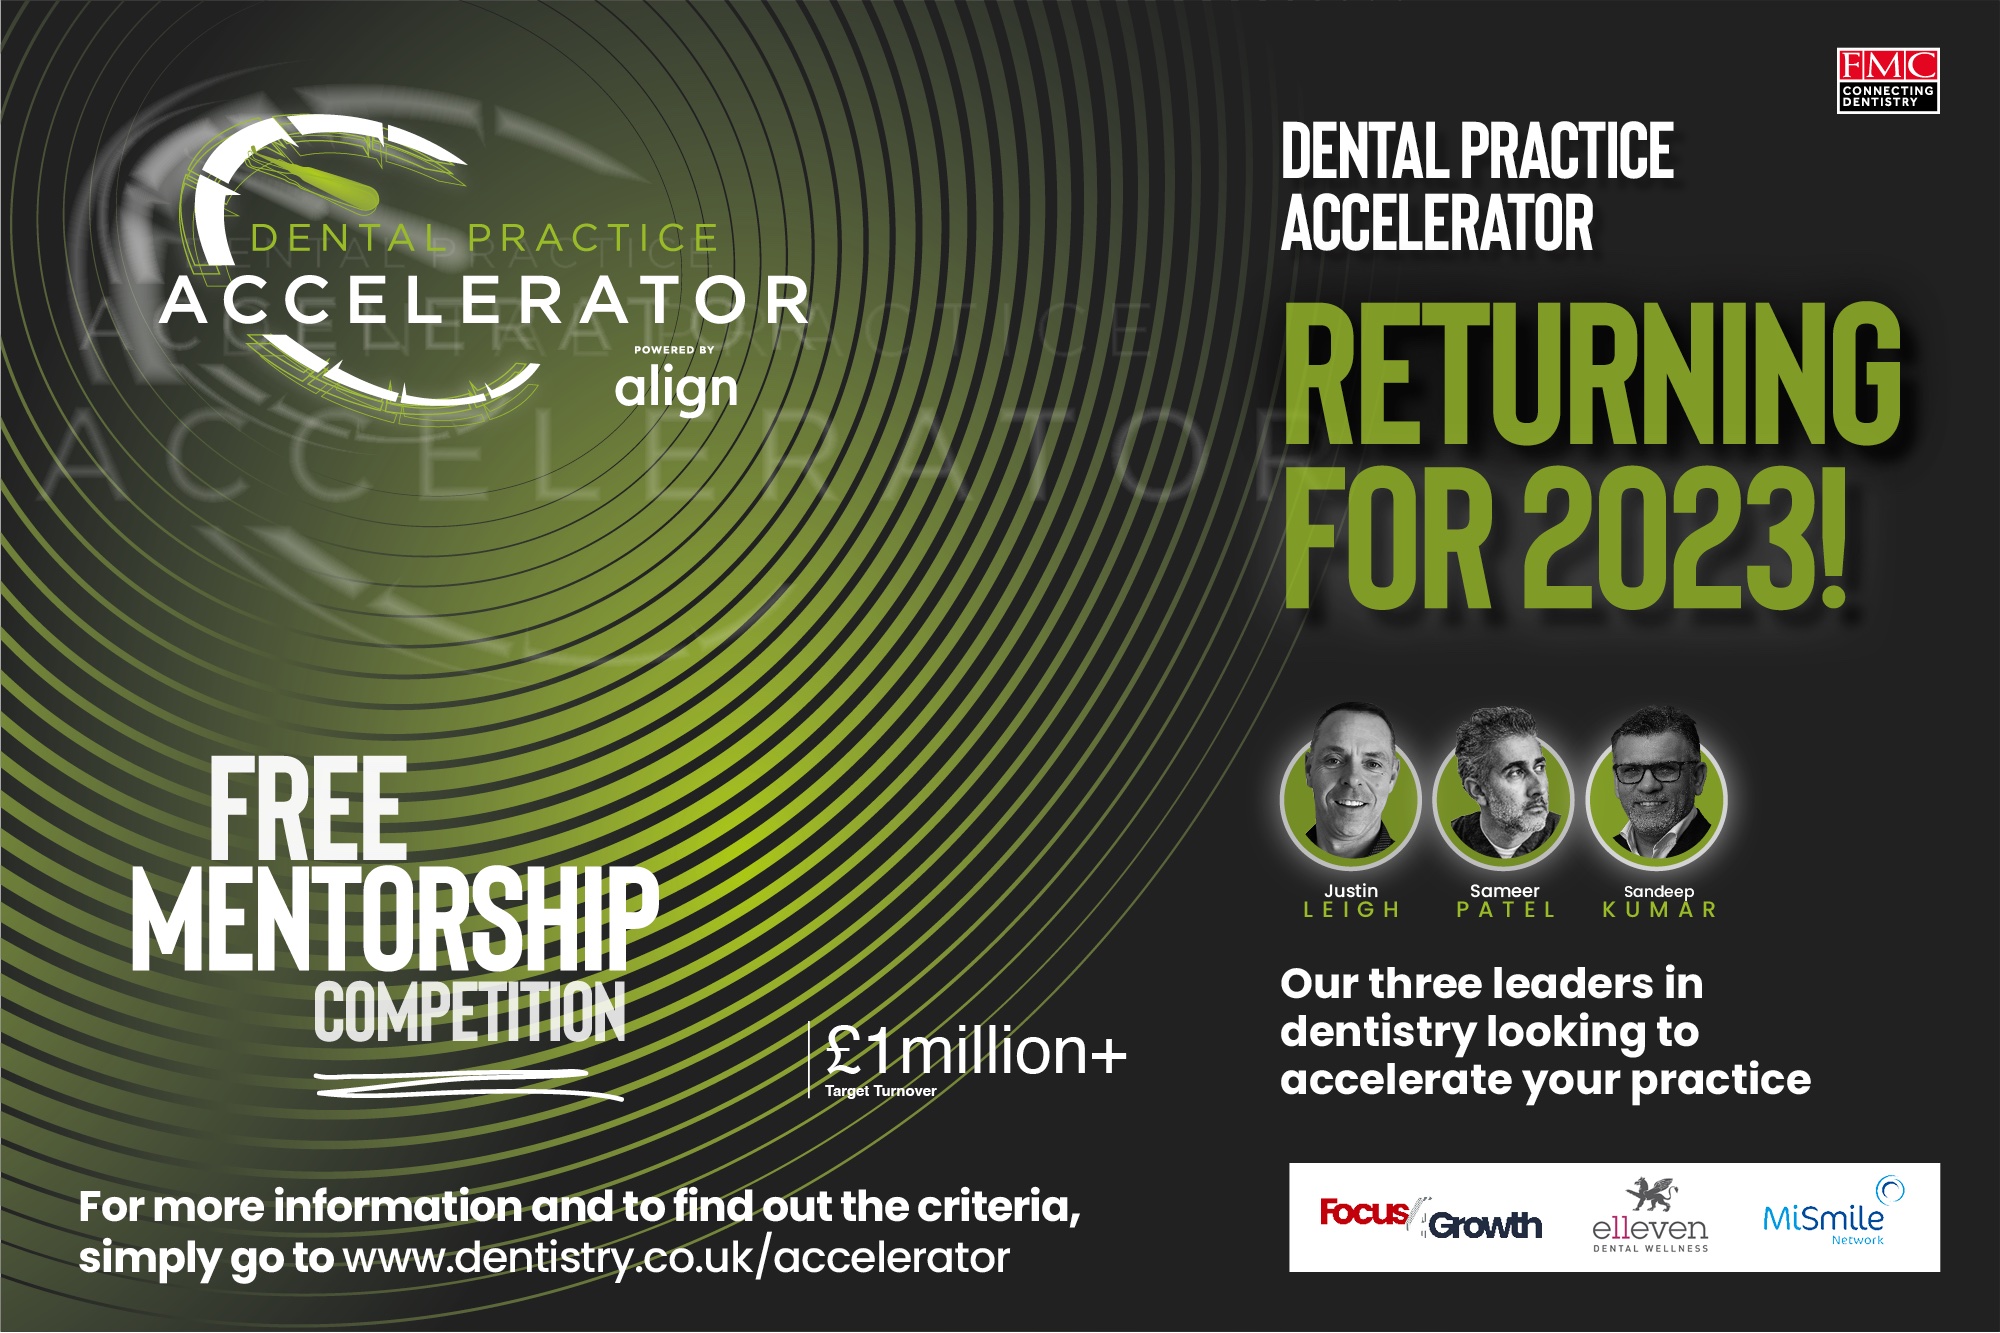 The second round of Dental Practice Accelerator is officially open for entries!